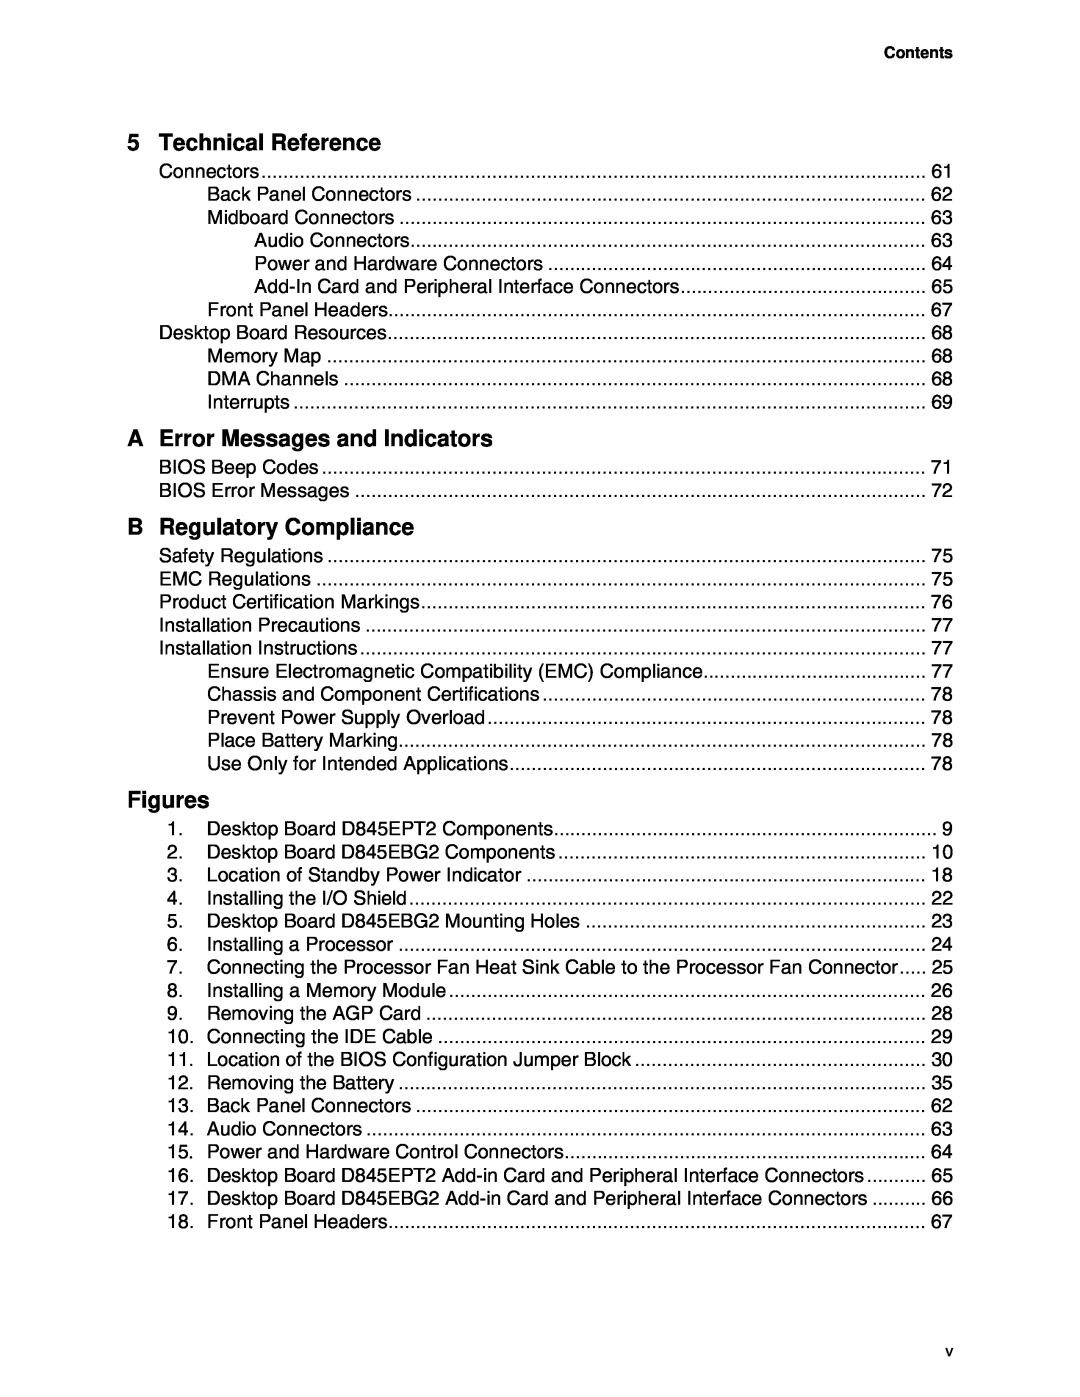 Intel D845EBG2, D845EPT2 manual Technical Reference, Error Messages and Indicators, Regulatory Compliance, Figures, Contents 